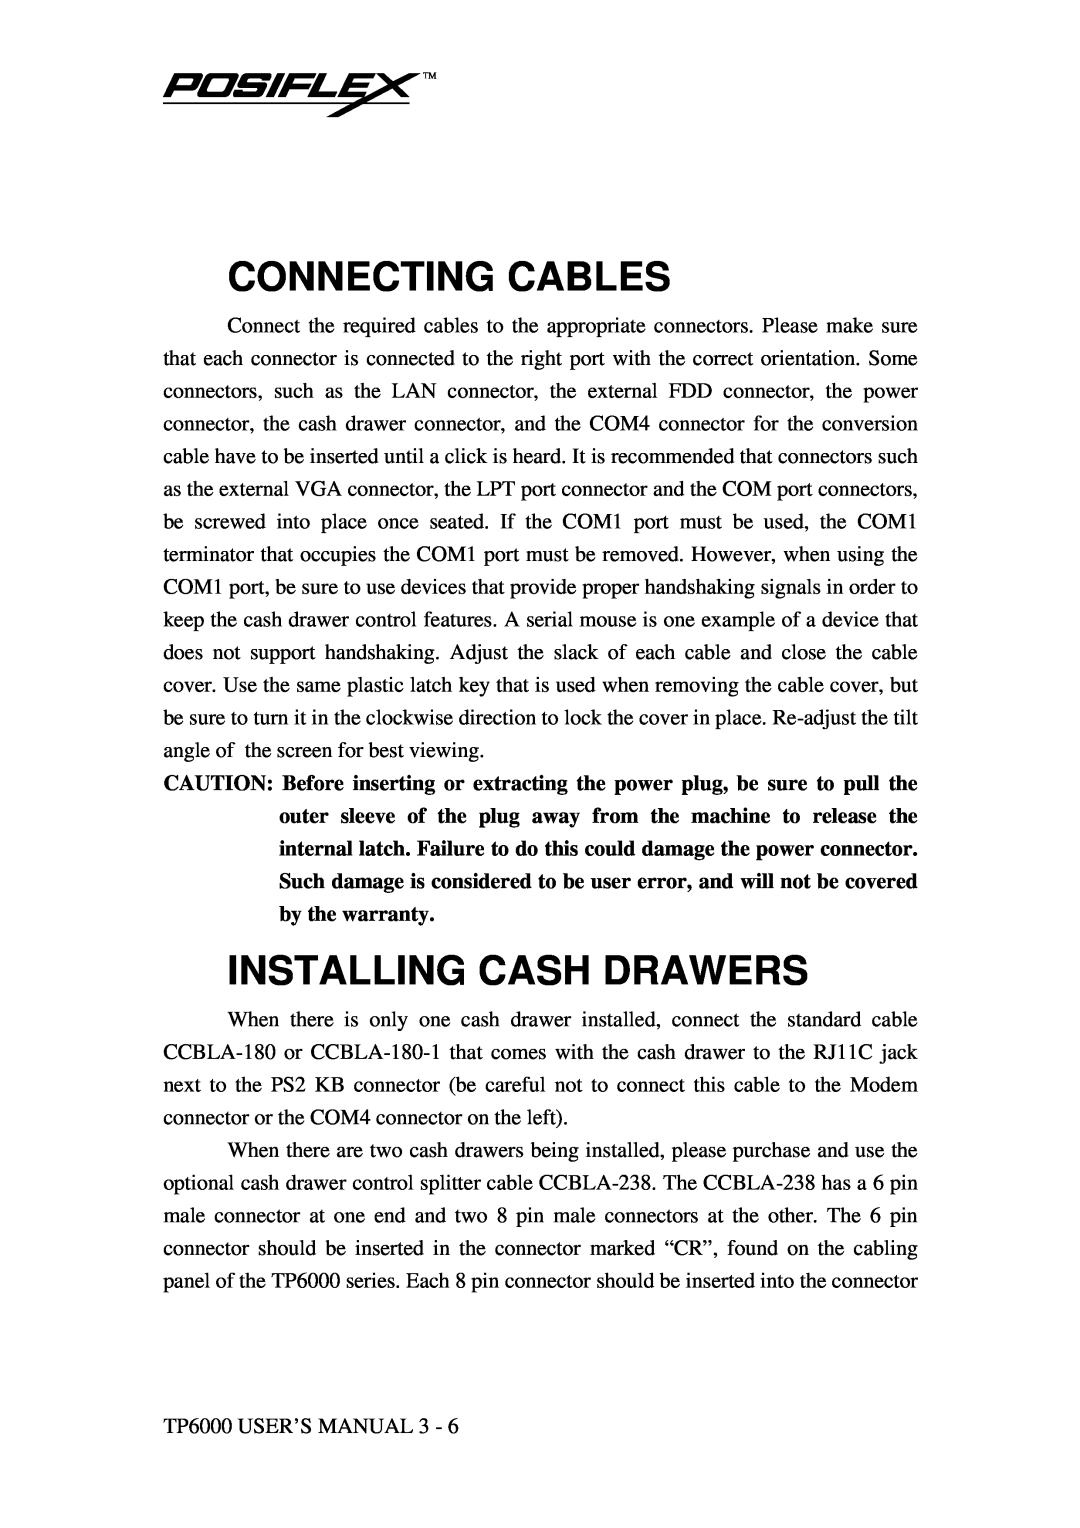 Mustek TP-6000 user manual Connecting Cables, Installing Cash Drawers 